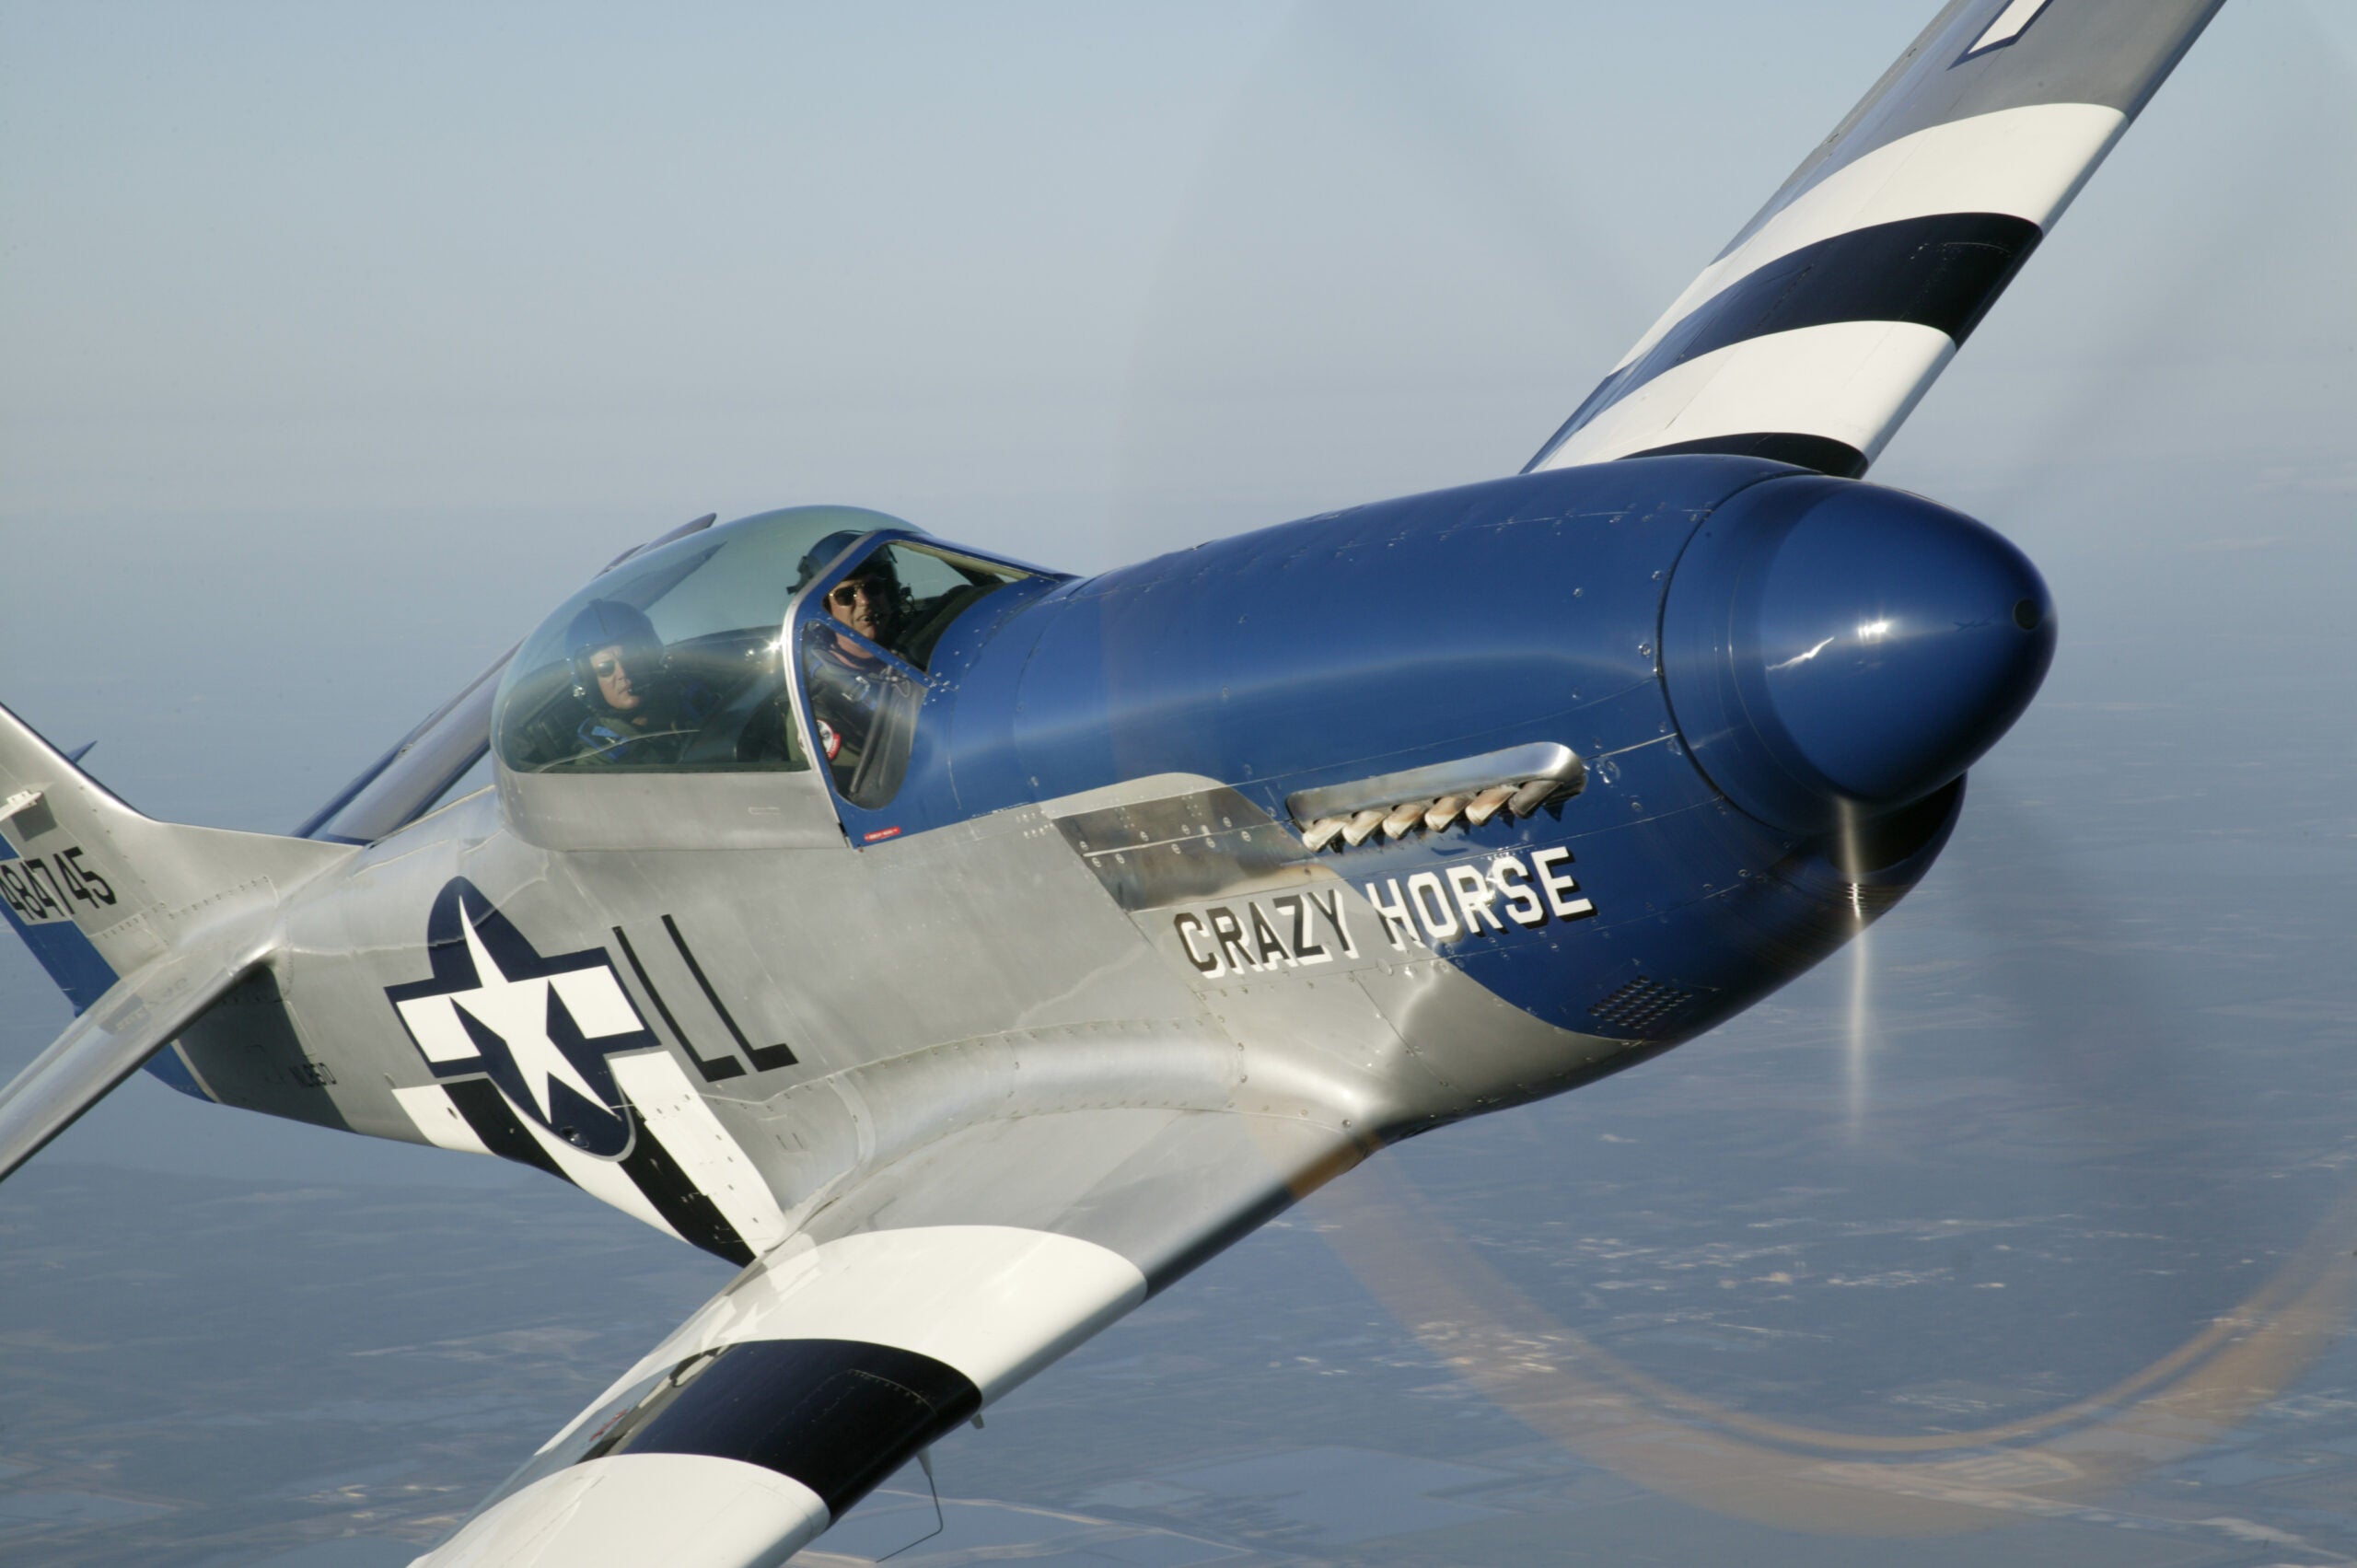 Support STEM Education and Win a P-51 Vacation Experience